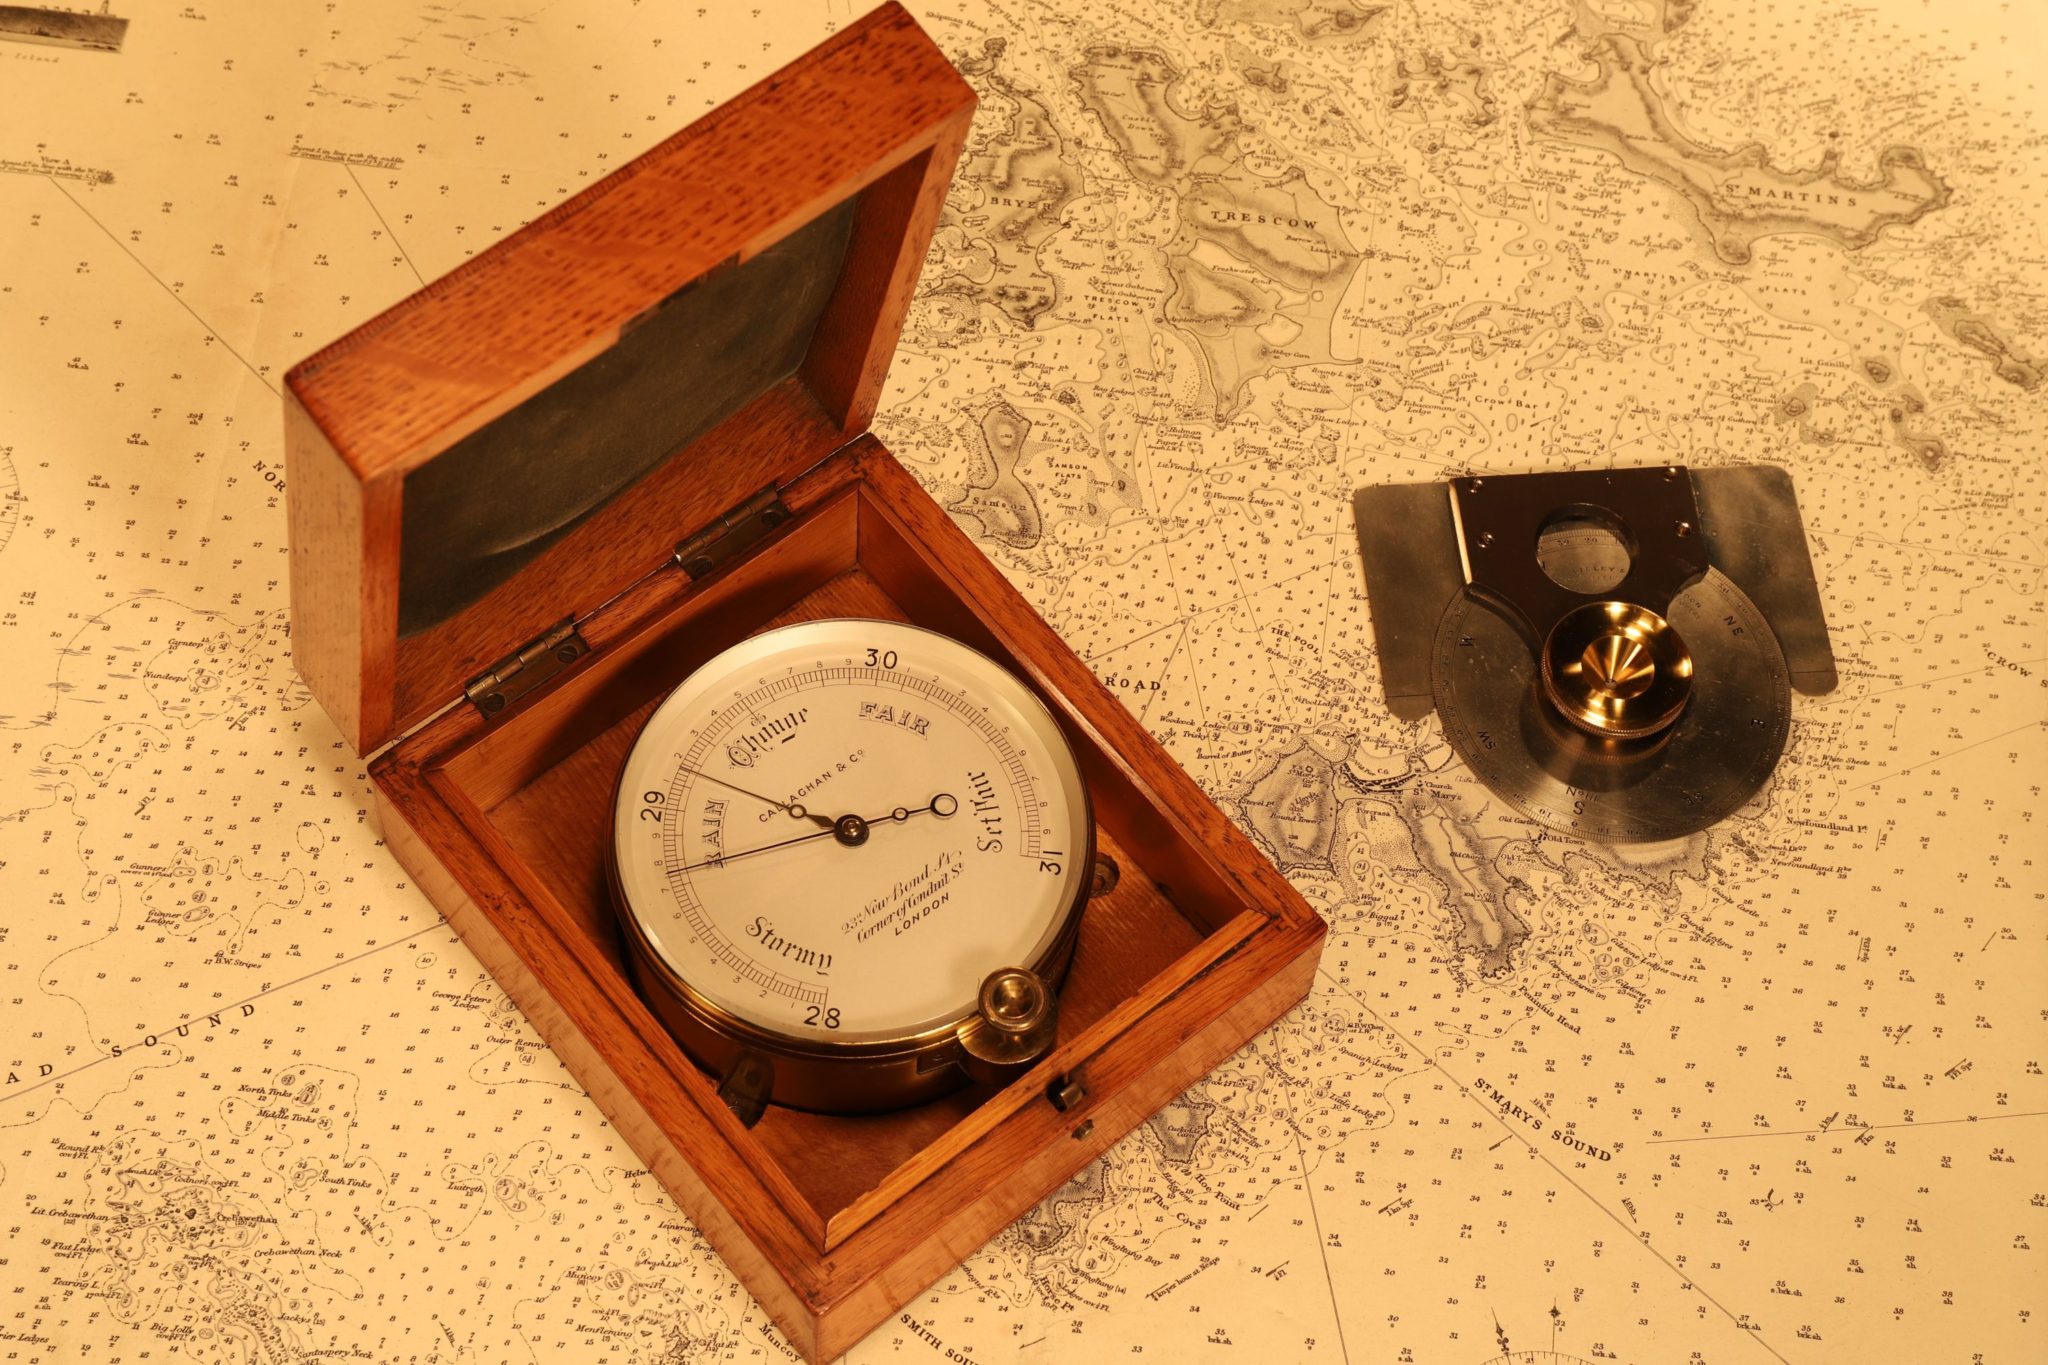 RARE ANTIQUE SHIPS BAROMETER BY CALLAGHAN IN OAK DECK CASE NO 7224 c1870